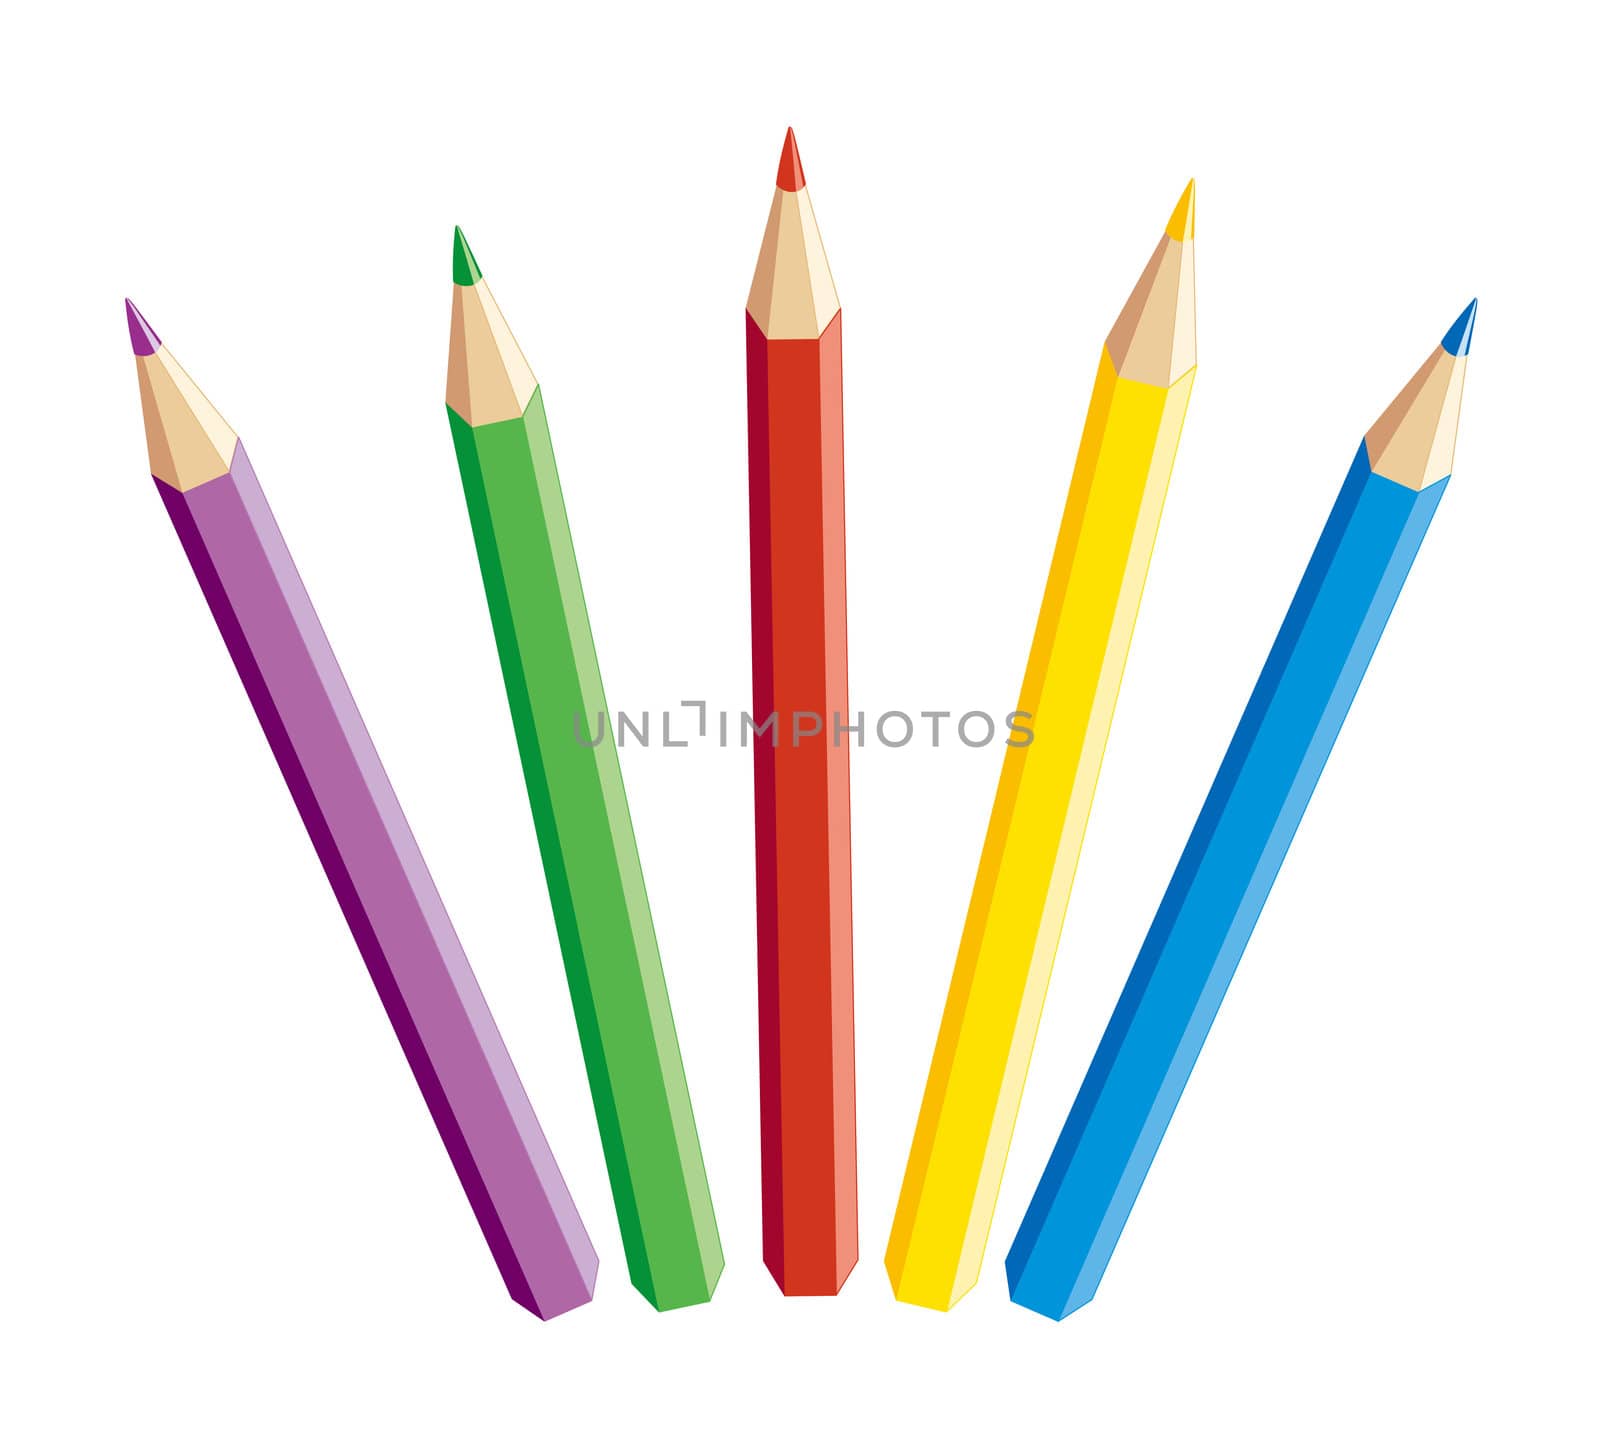 Colored pencils of various colors